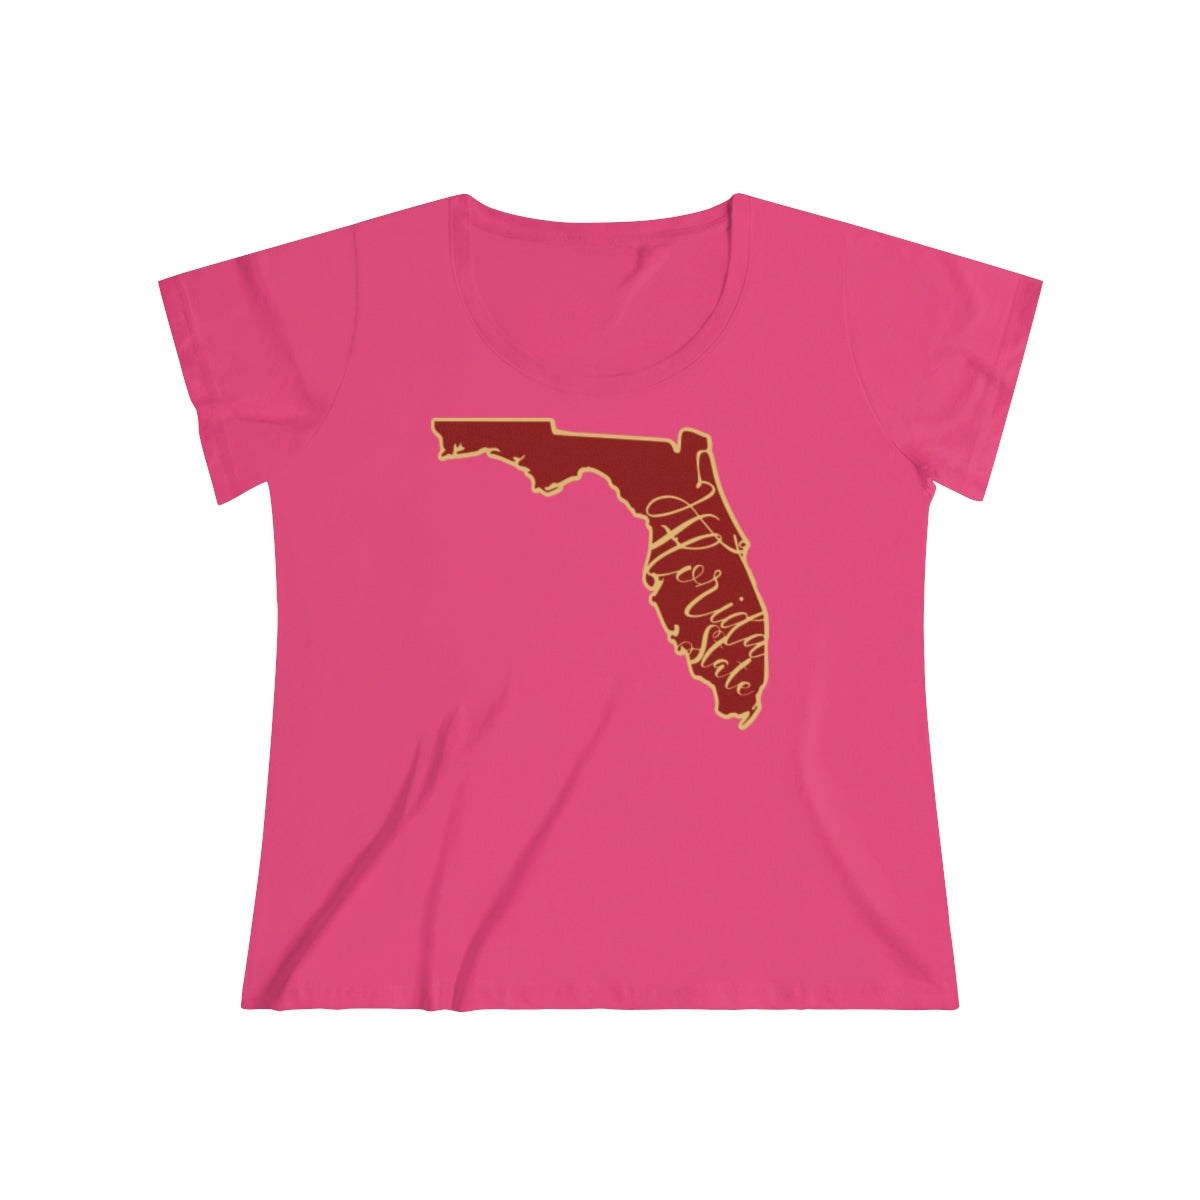 Florida State University Inspired State Outline Women's Curvy Tee